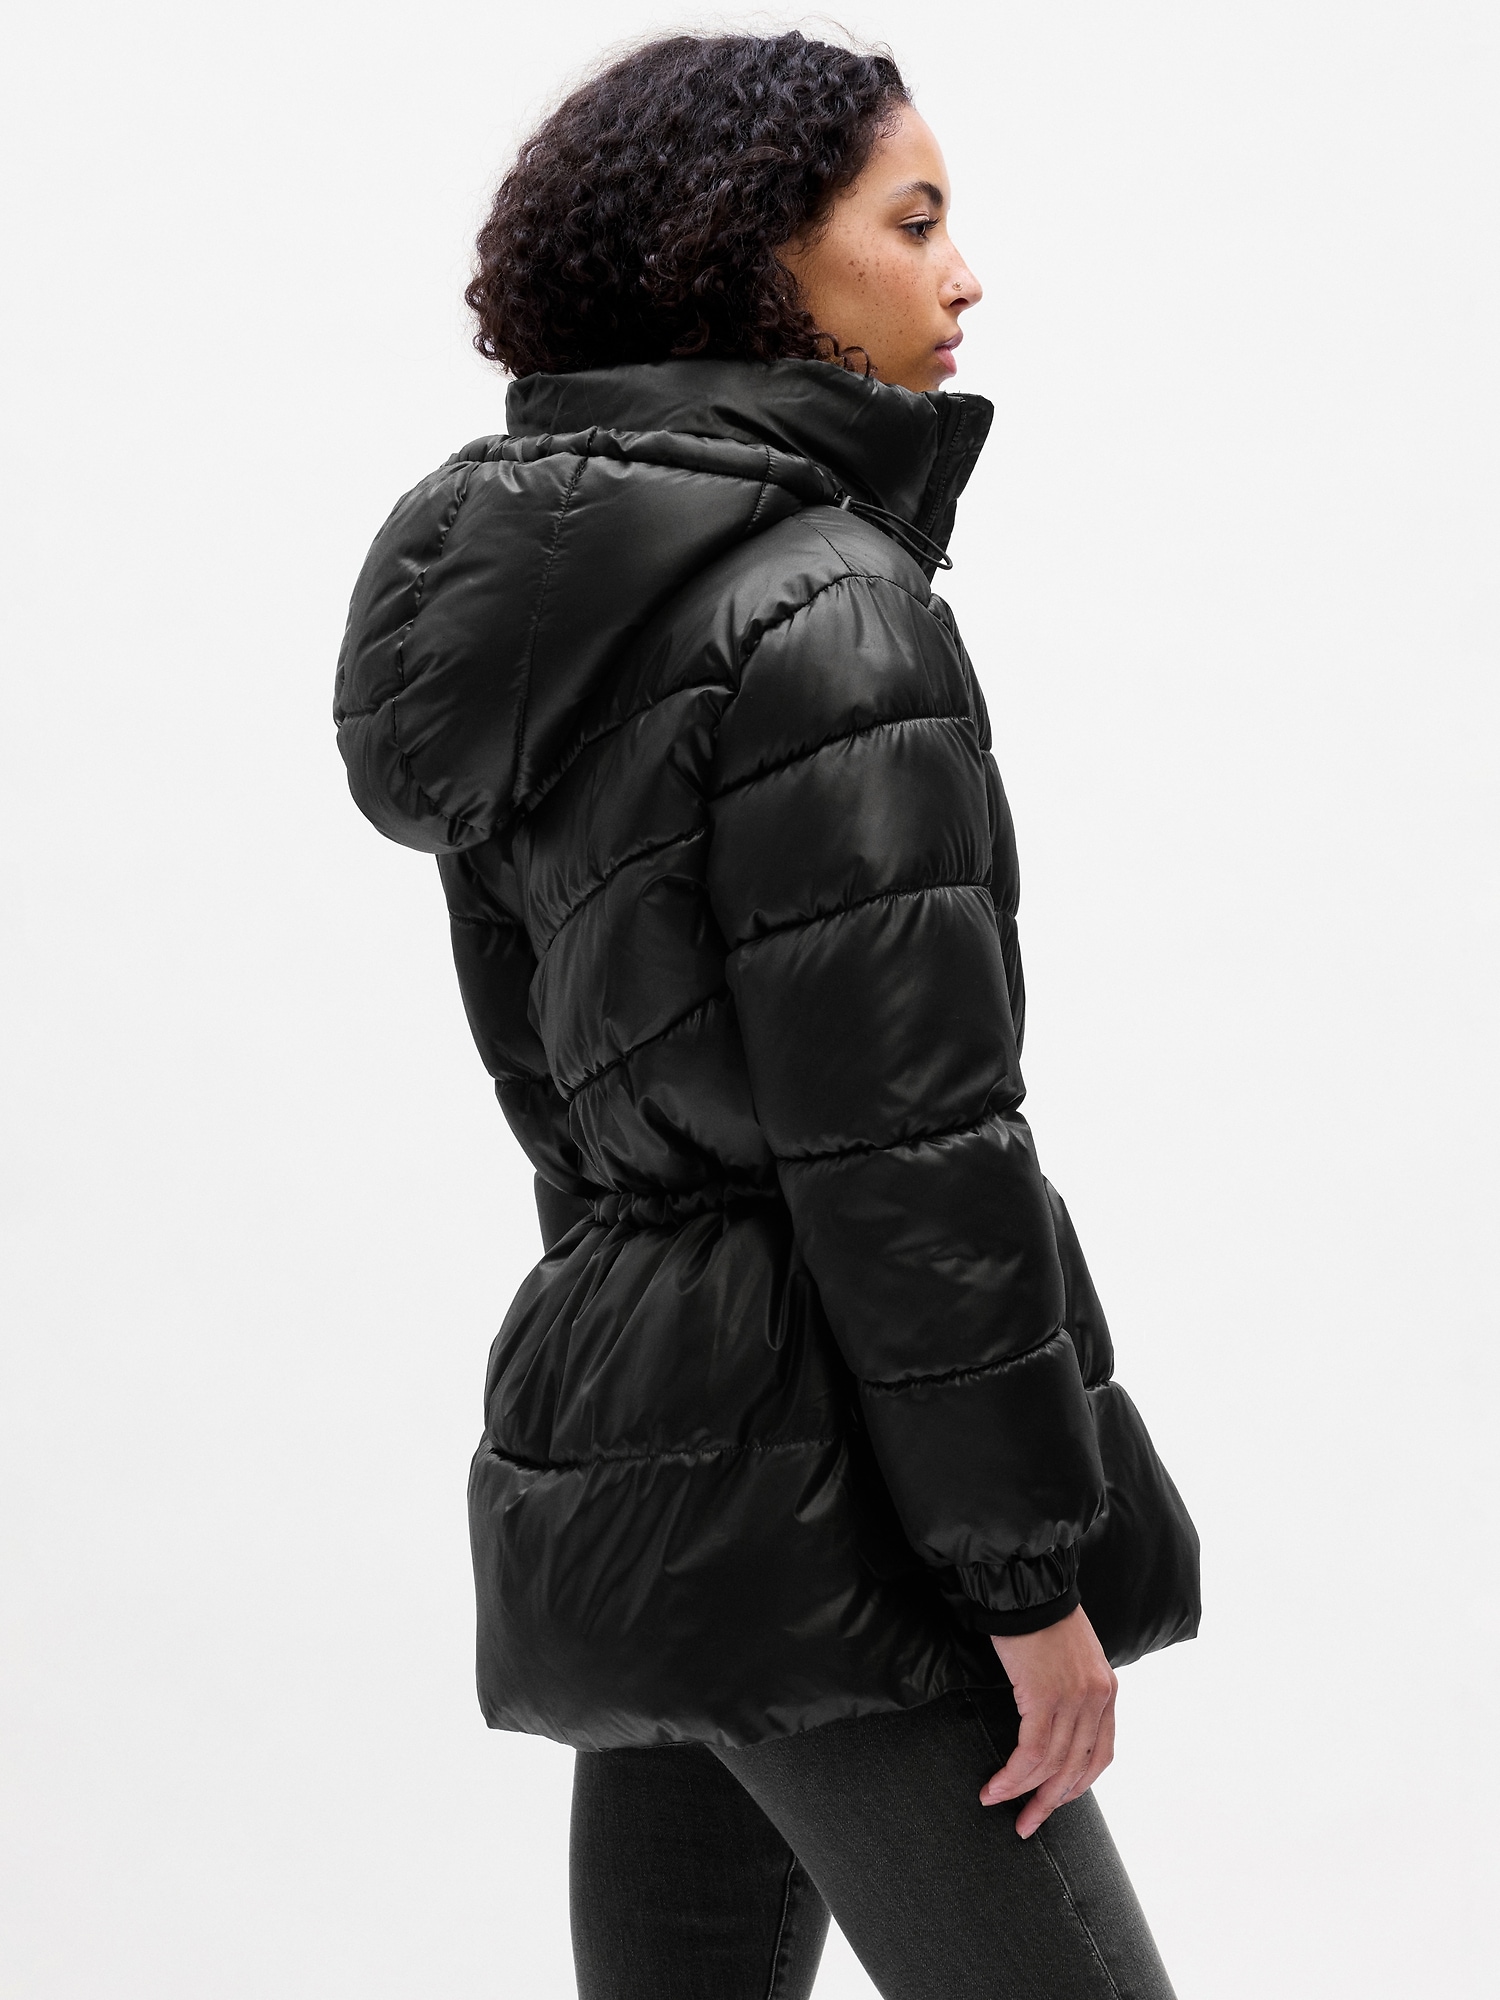 ColdControl Max Relaxed Long Puffer Coat | Gap Factory